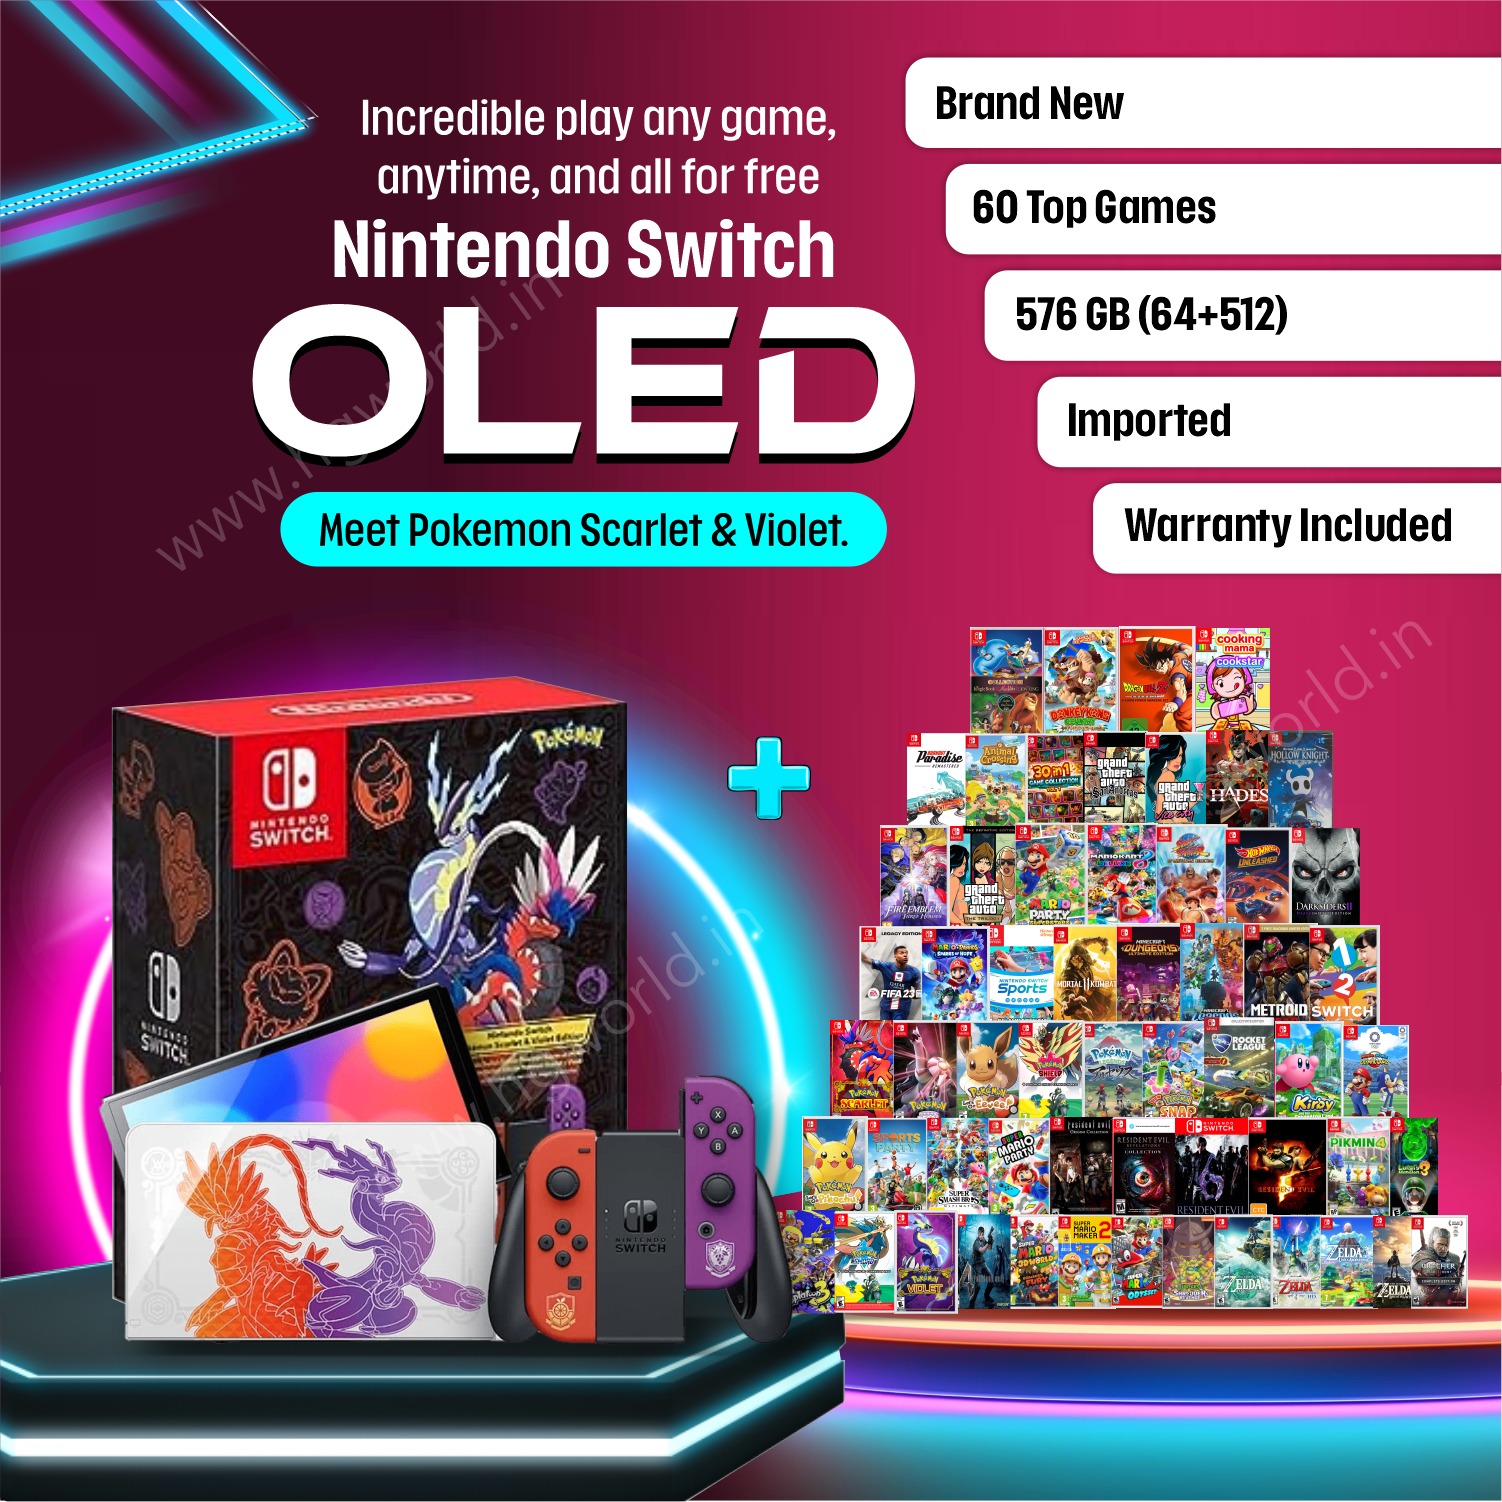 Brand New NINTENDO Switch Oled | 60+ Best Games Bundle | 576 GB  Internal(64+512) | Pokemon Scarlet and Violet Edition | Handheld Portable  Gaming 